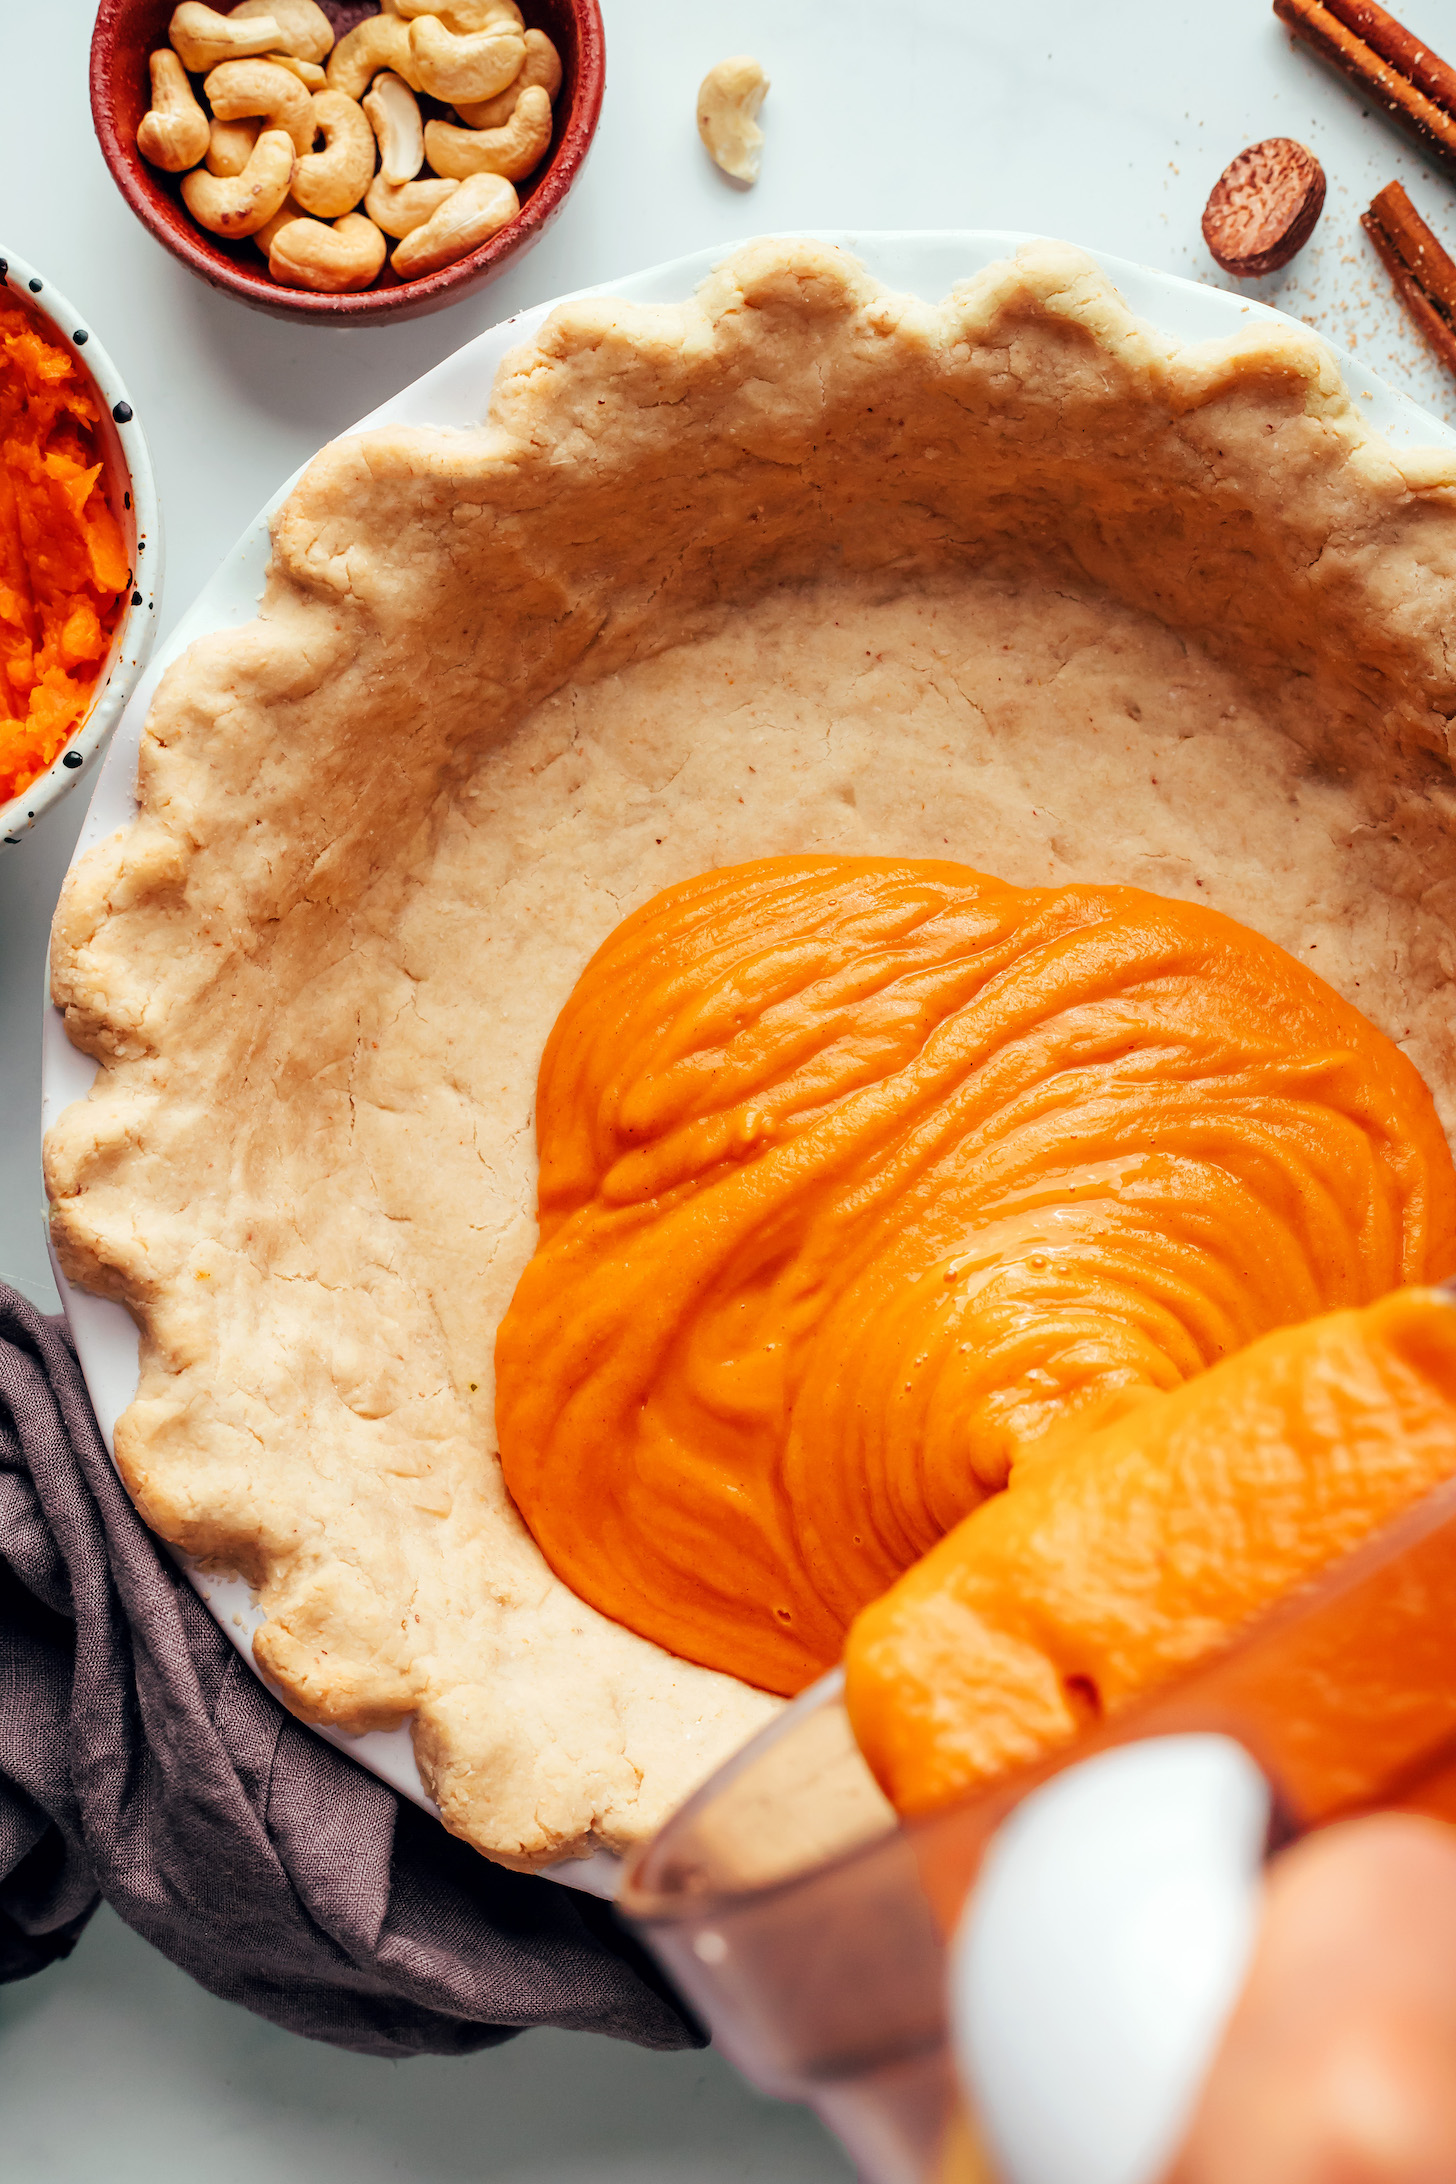 Pouring sweet potato pie filling from a blender into a par-baked pie crust